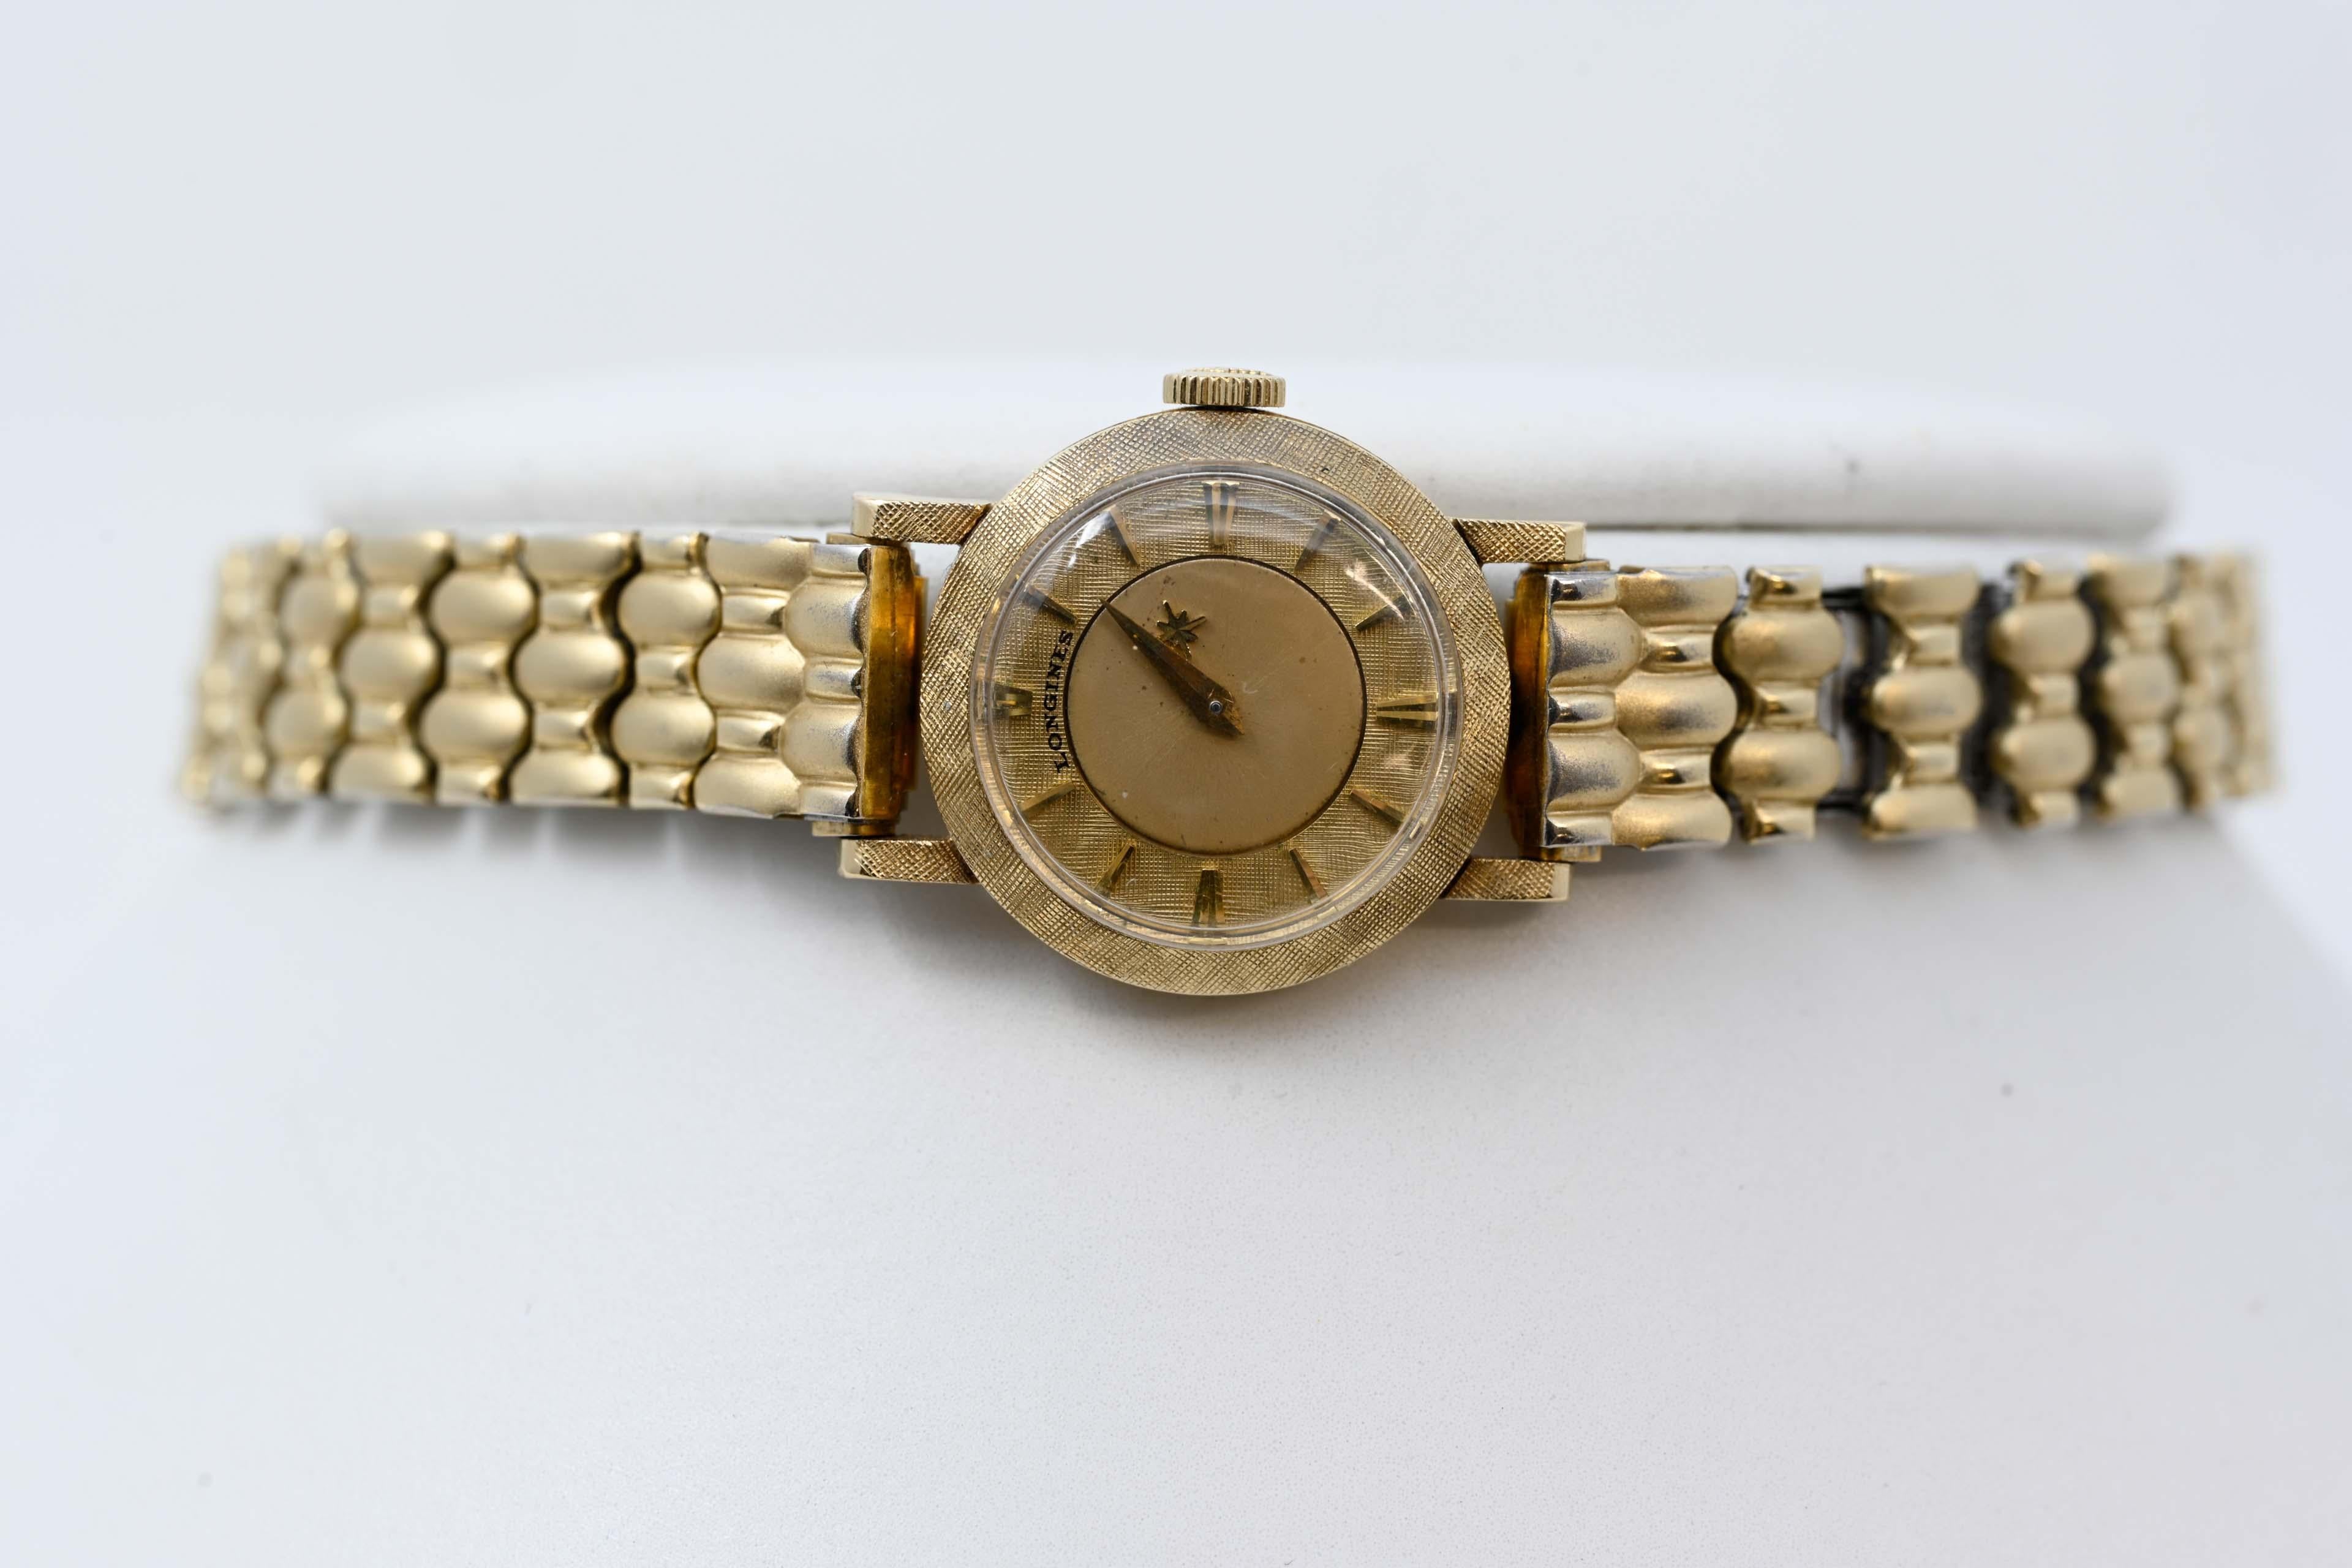 Longines mystery dial ladies watch 14k yellow gold with extension Speidel bracelet. Original gold crown, case 19mm gold dial and 20mm with crown. Mechanical movement ,stamped 14k, Made in Switzerland circa 1960-70, working order.